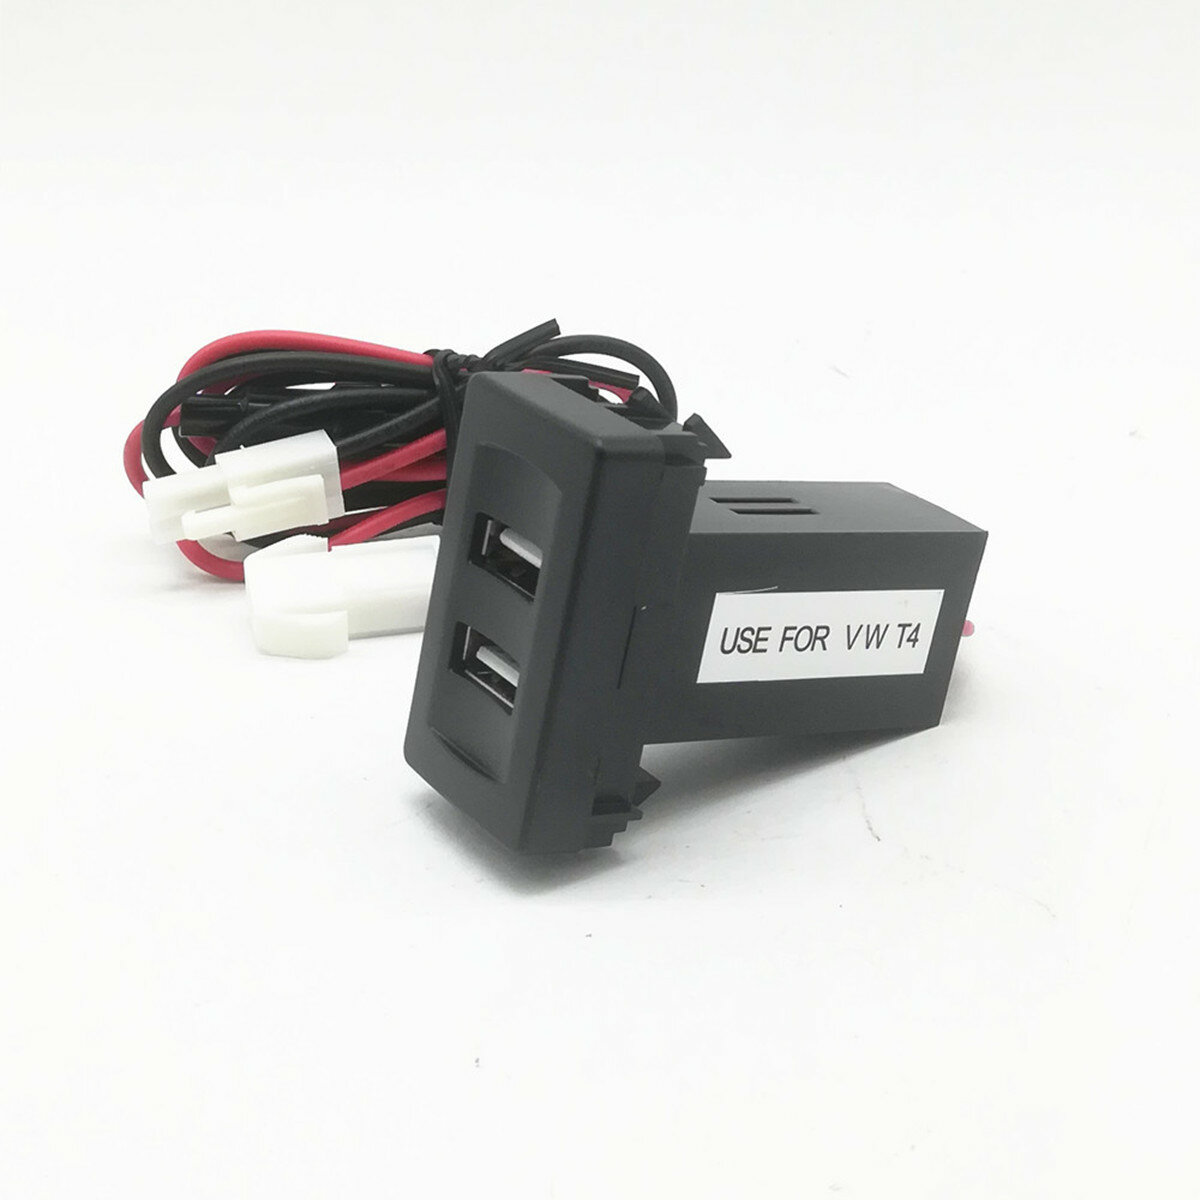 Universal USB Car Dual USB Charger For VW For Volkswagen T4 Models 2.1A